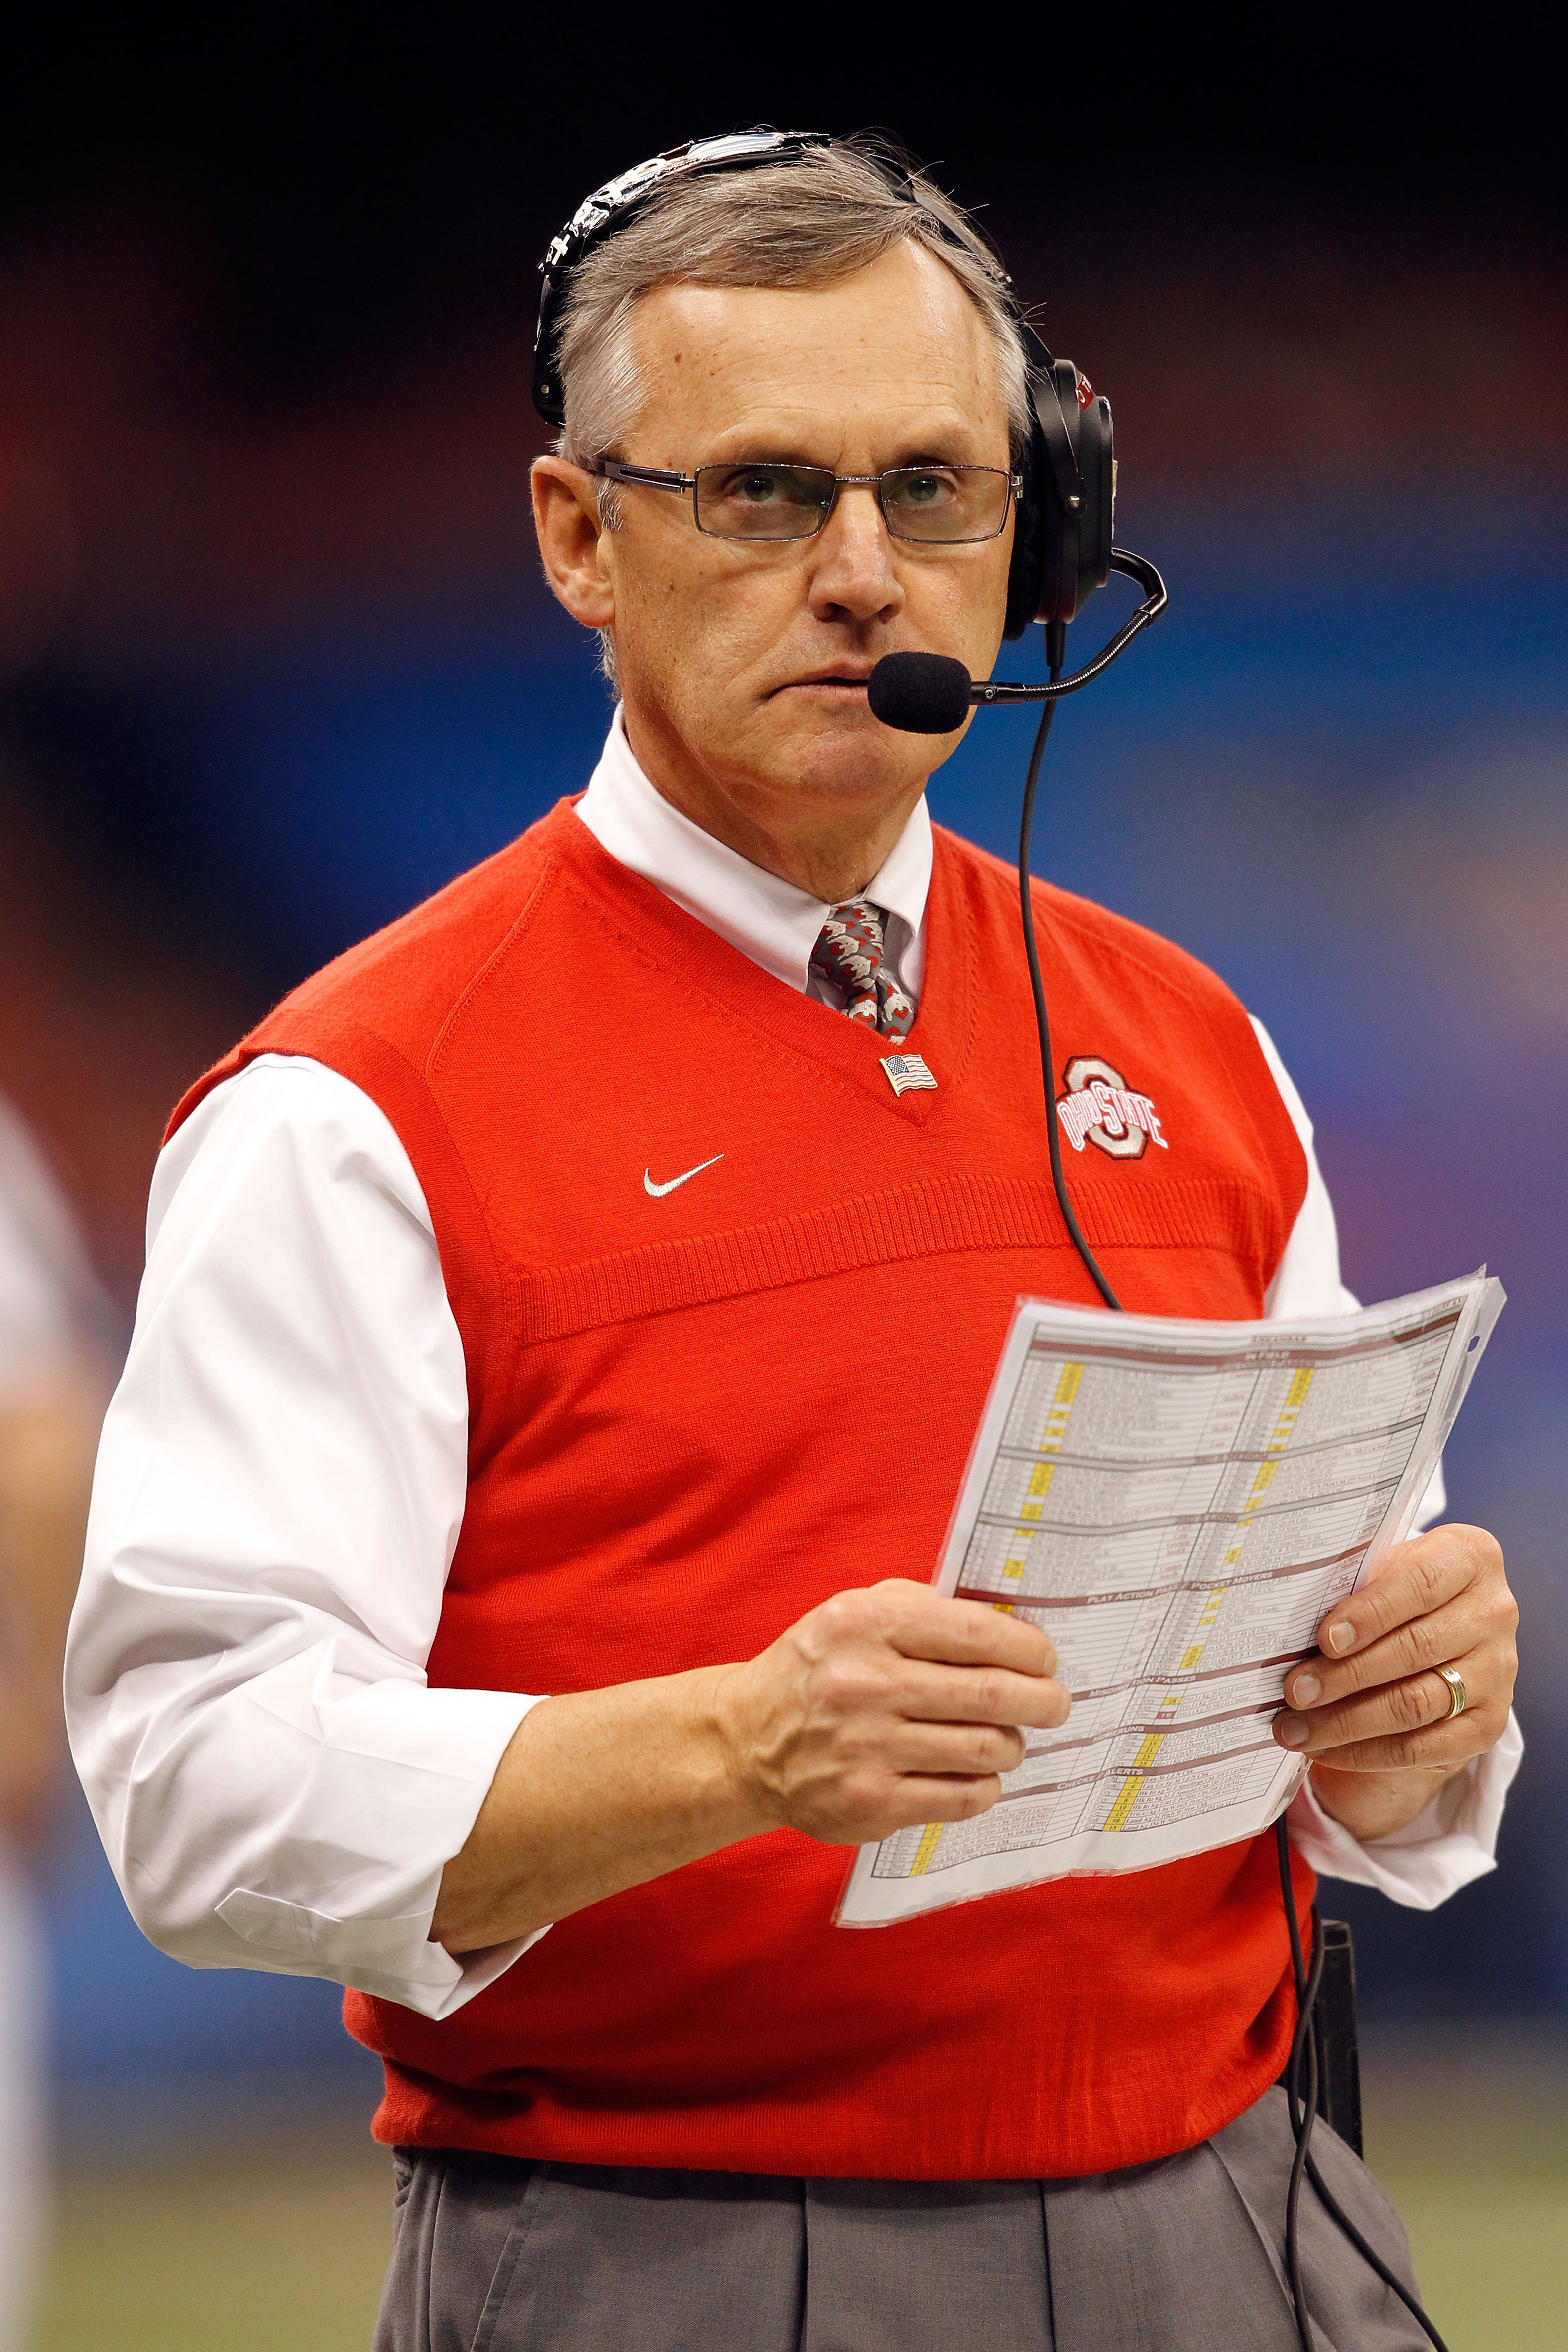 NEW ORLEANS, LA - JANUARY 04:  Head coach Jim Tressel of the Ohio State Buckeyes looks on against the Arkansas Razorbacks during the Allstate Sugar Bowl at the Louisiana Superdome on January 4, 2011 in New Orleans, Louisiana.  (Photo by Matthew Stockman/G